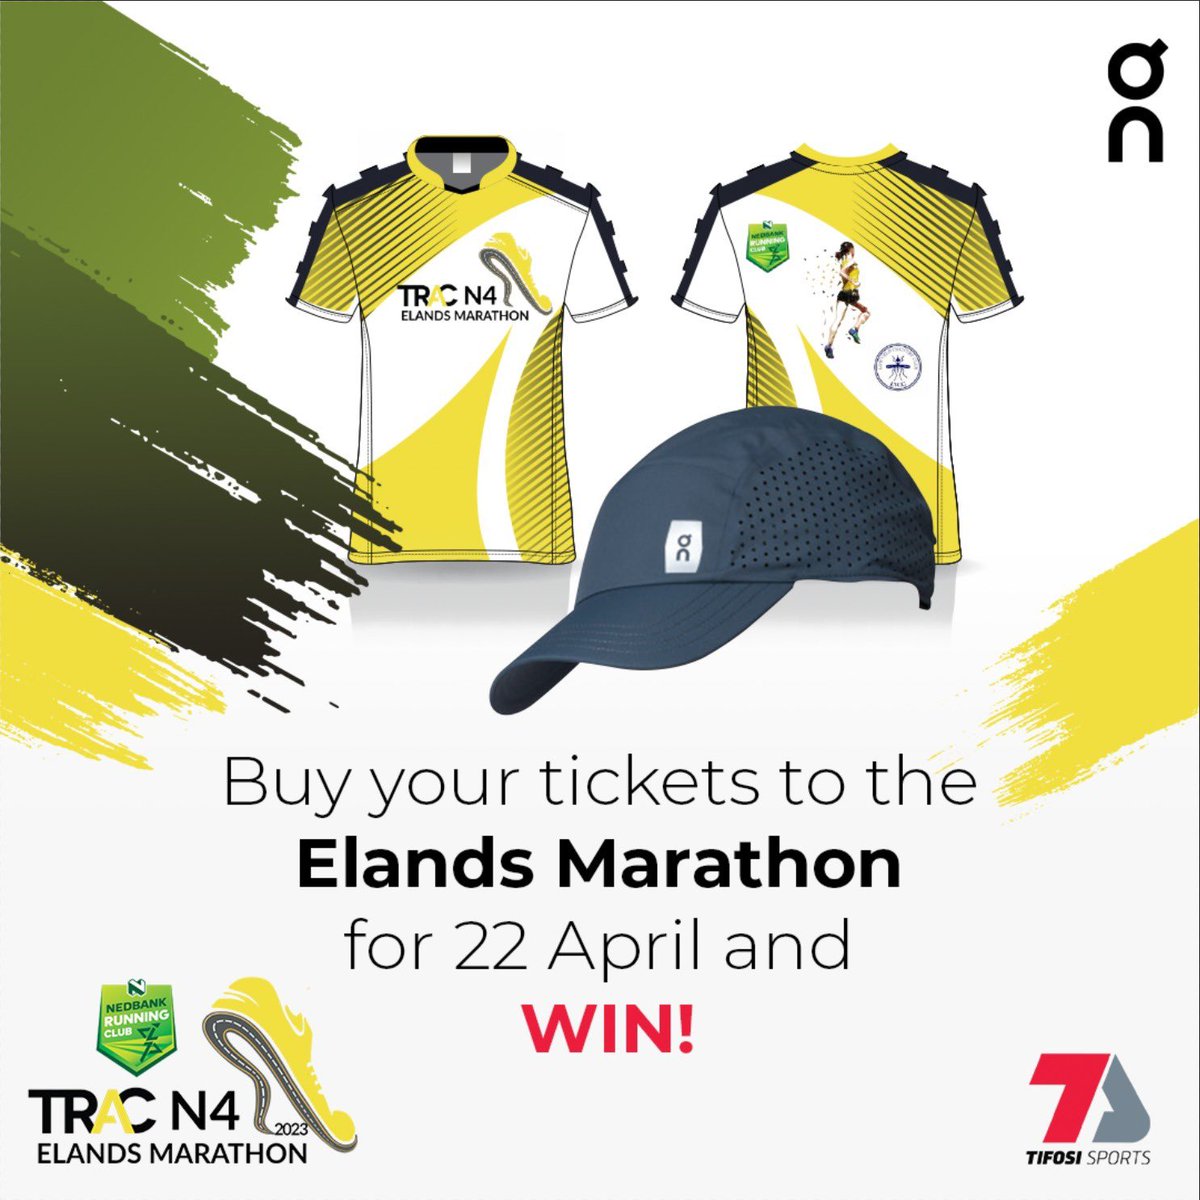 🎉Giveaway! 🎉
Stand to win 1 of 6 race hampers if you enter the #TracN4ElandsMarathon You must enter between 22 Feb and 7 March 2023 to WIN! Click here to enter elandsmarathon.co.za
@RISEfm943 | @Nedbank_RC | @ThirstiW #OnRunningSA #AlwaysOn #RunOnClouds #ForgetGravity